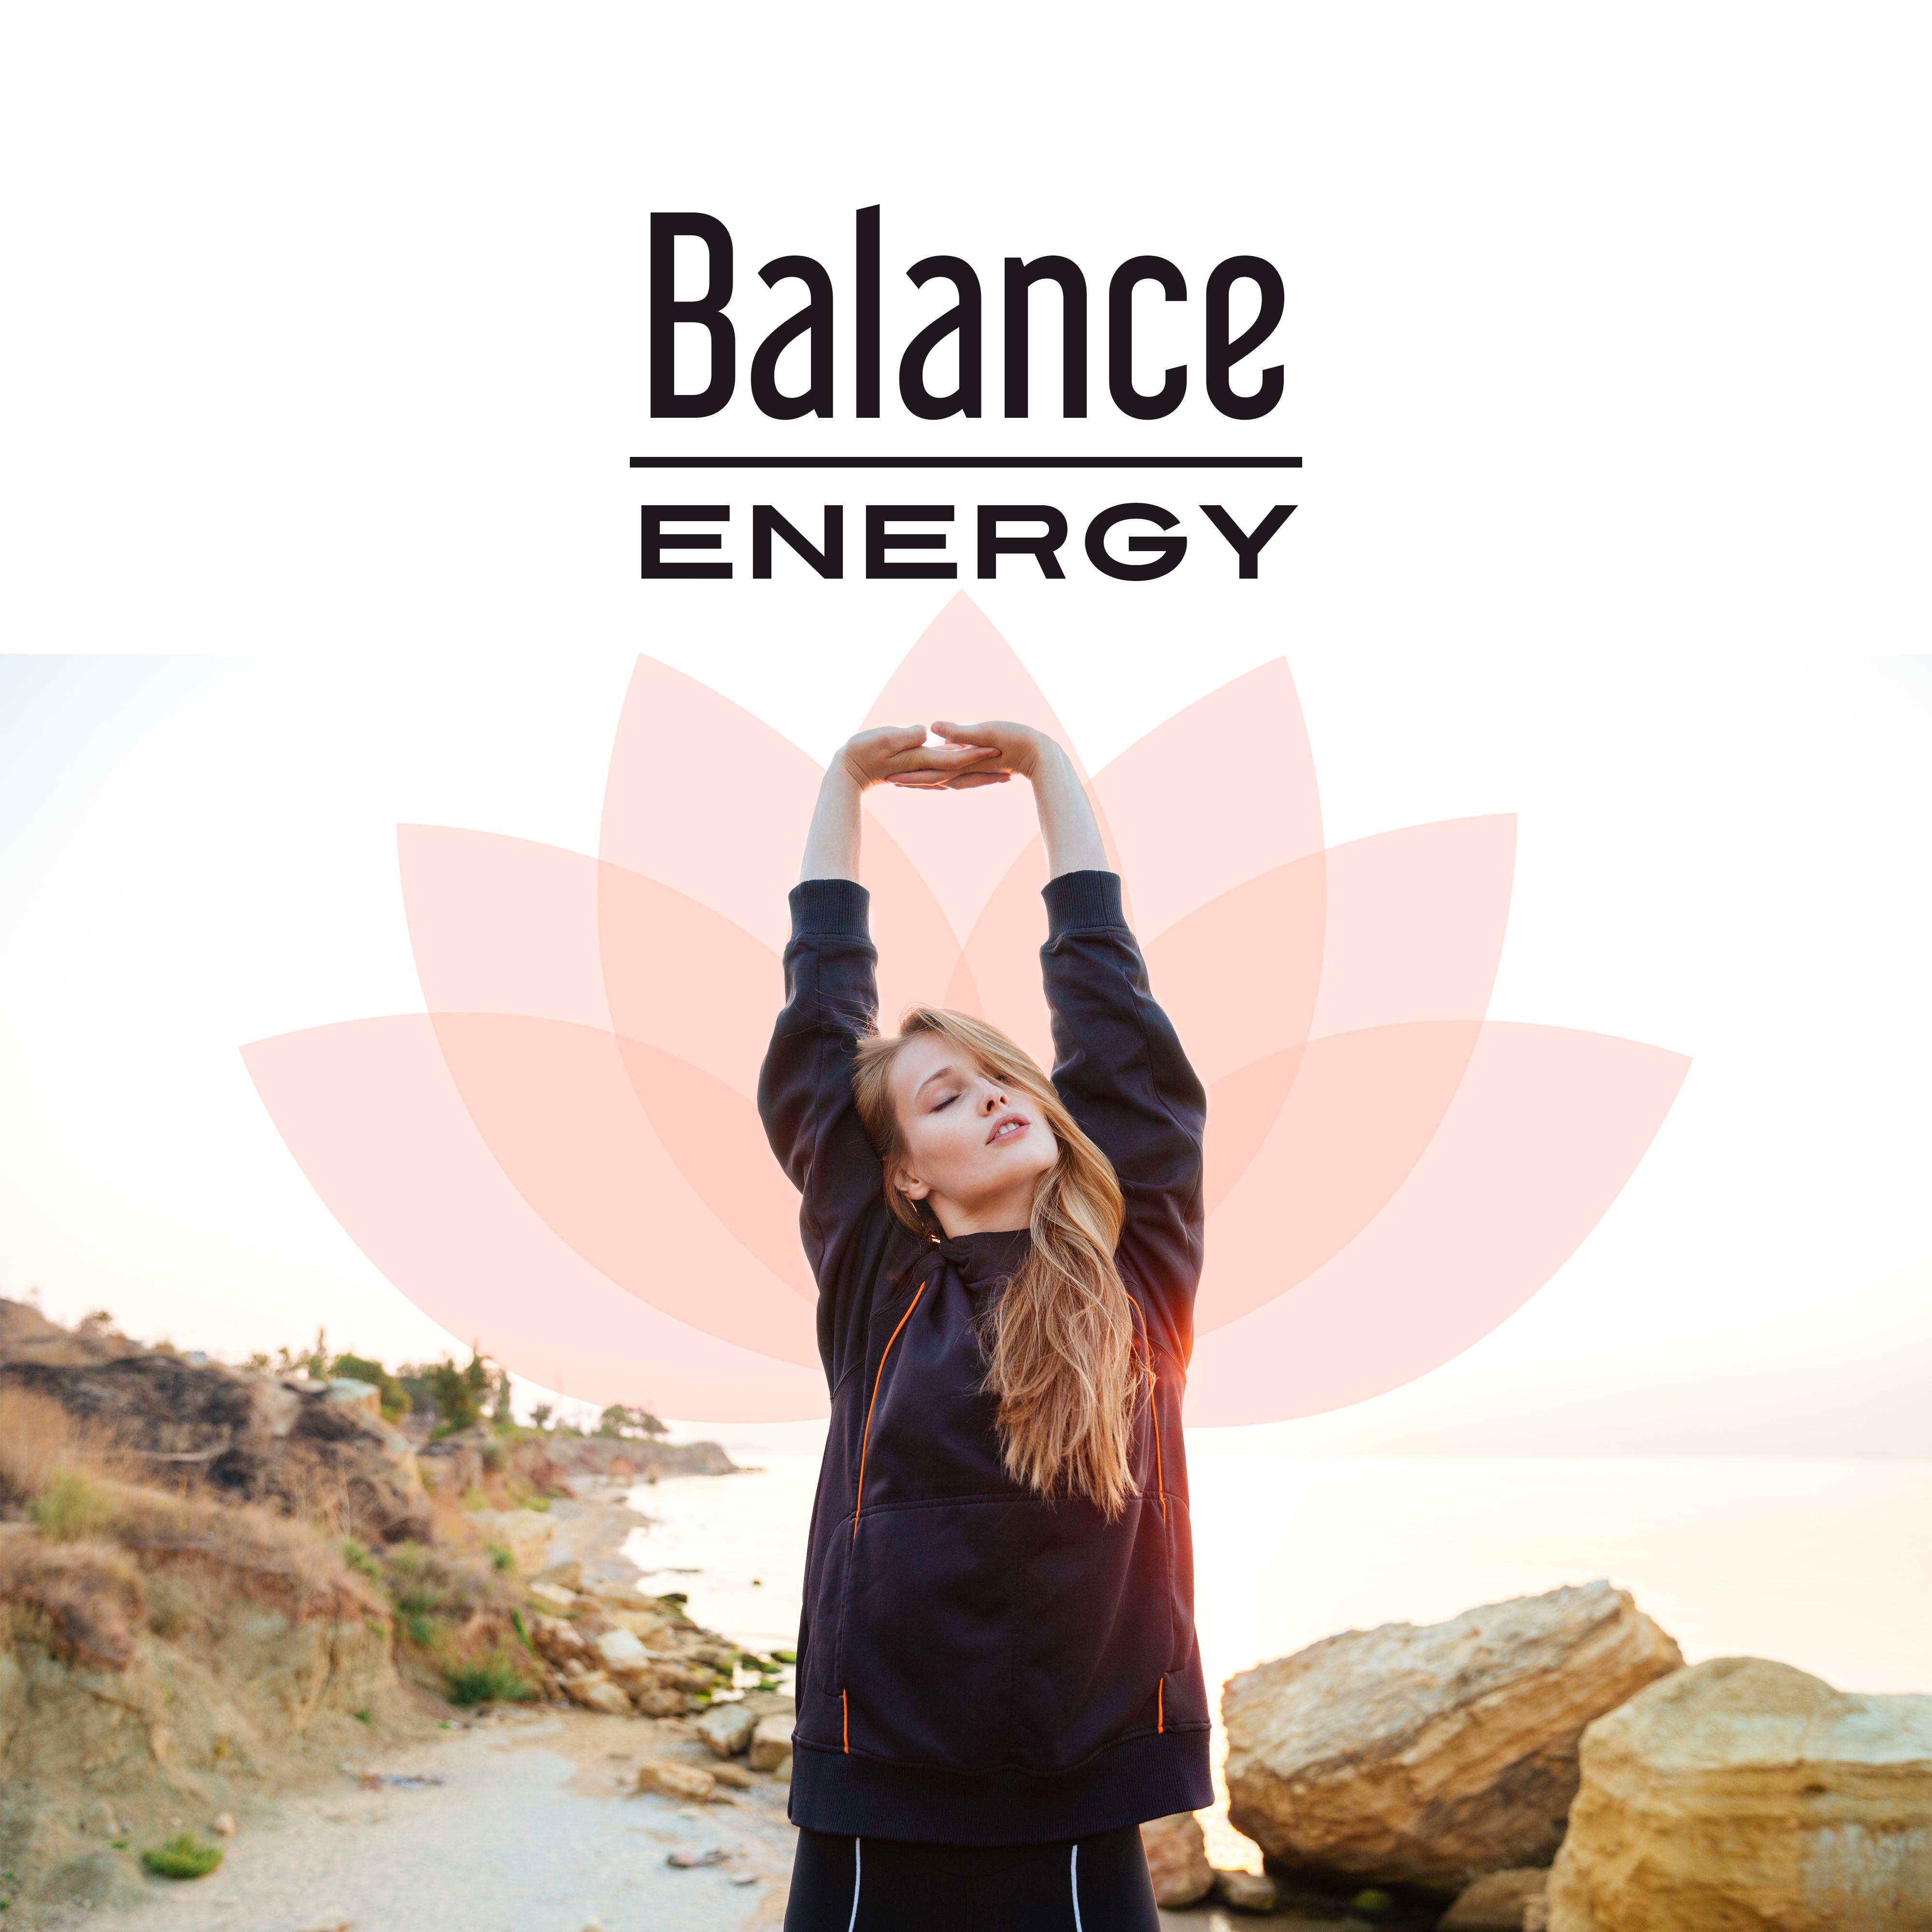 Balance Energy – Soft Meditation Music to Calm Down Spirit, New Age Sounds for Relaxation, Meditate in Peace